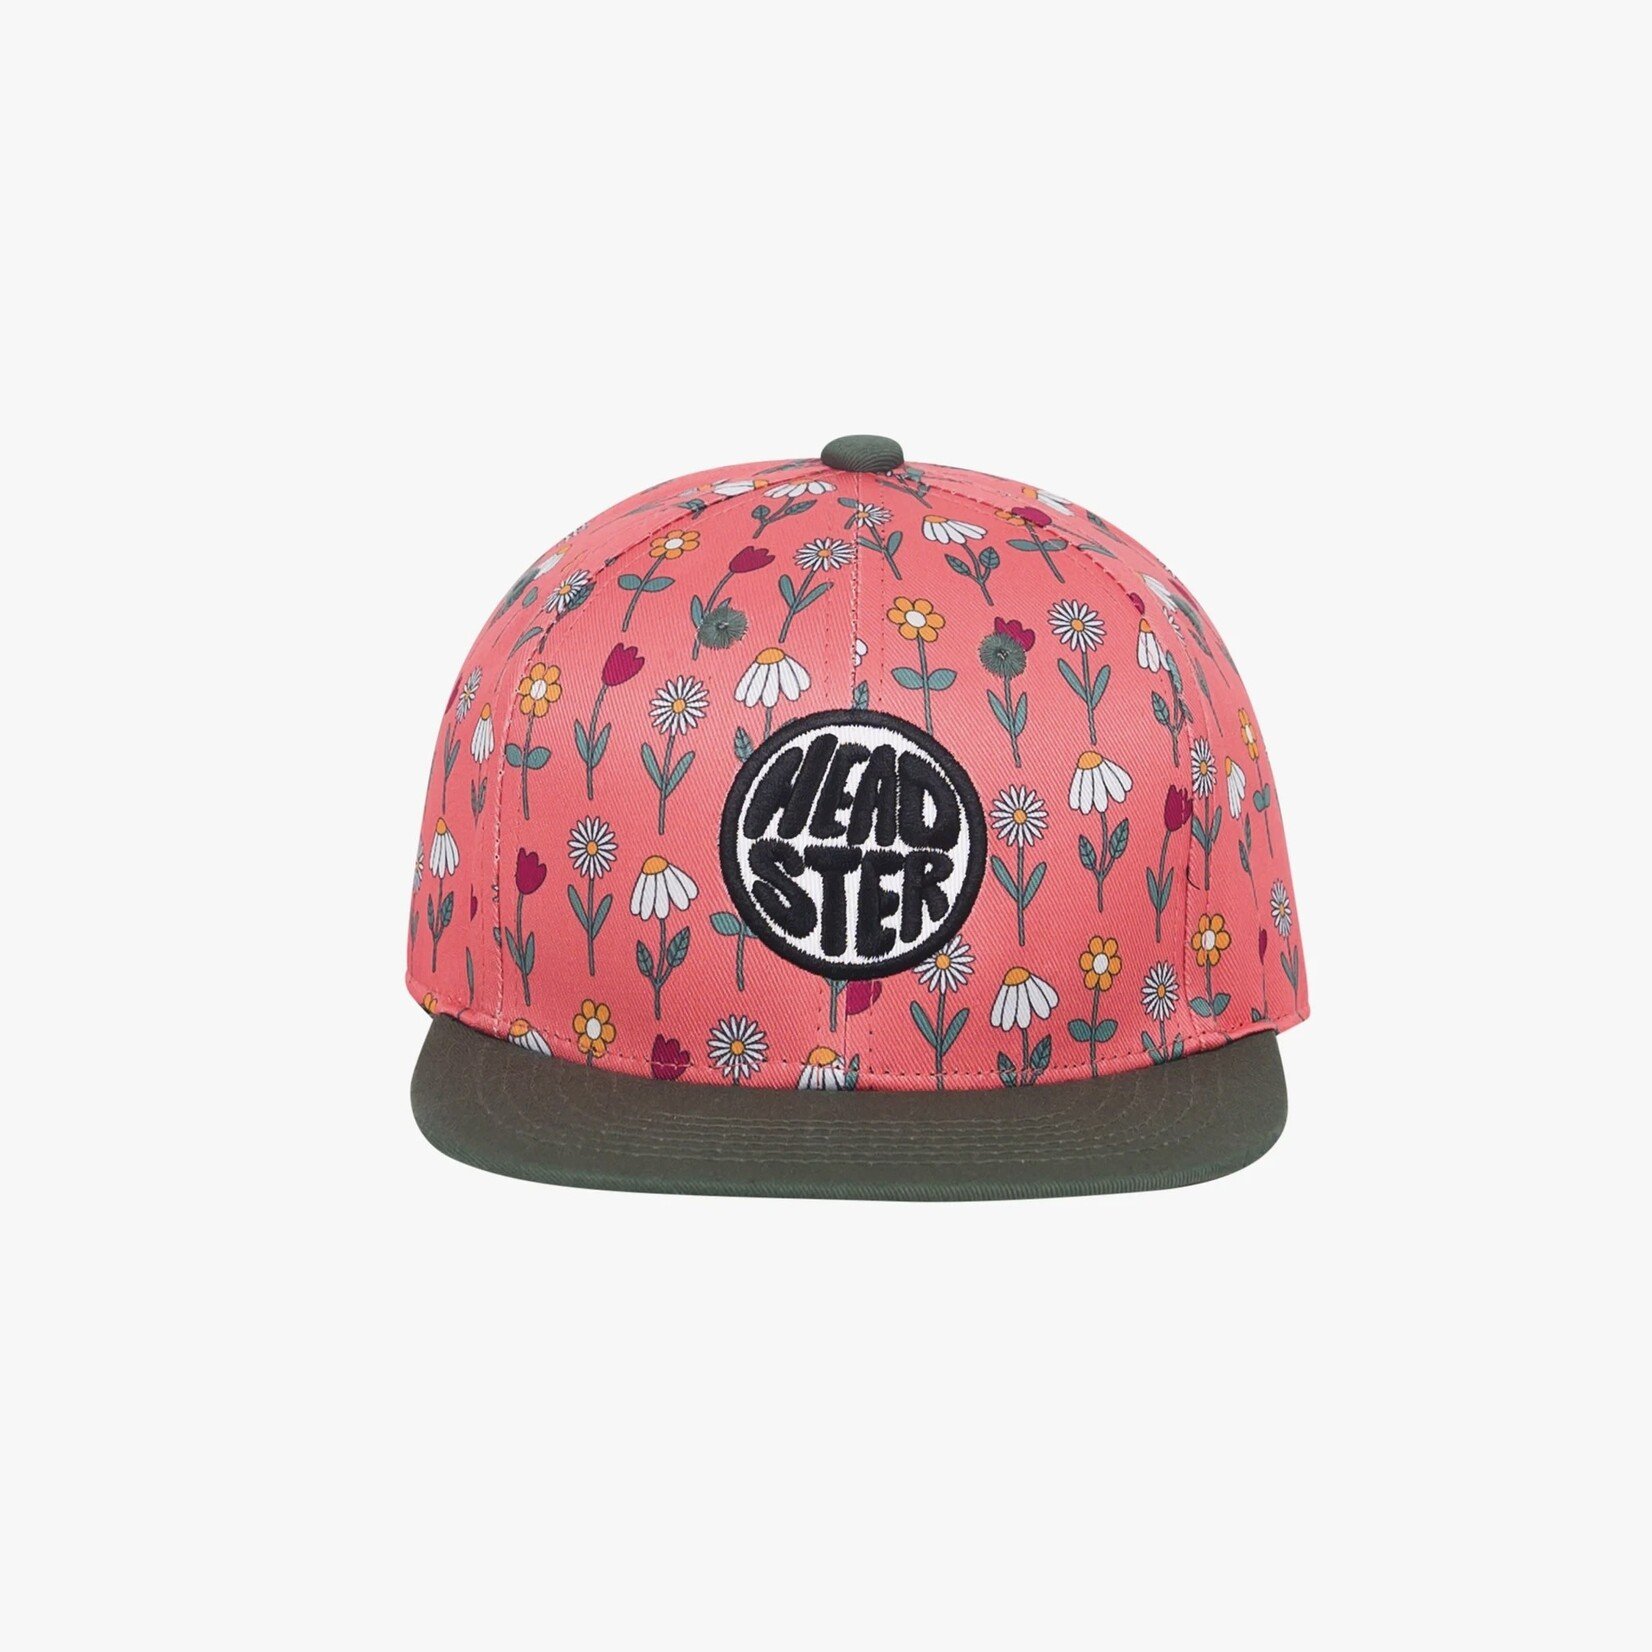 Headster Headster - Grow Up Snapback